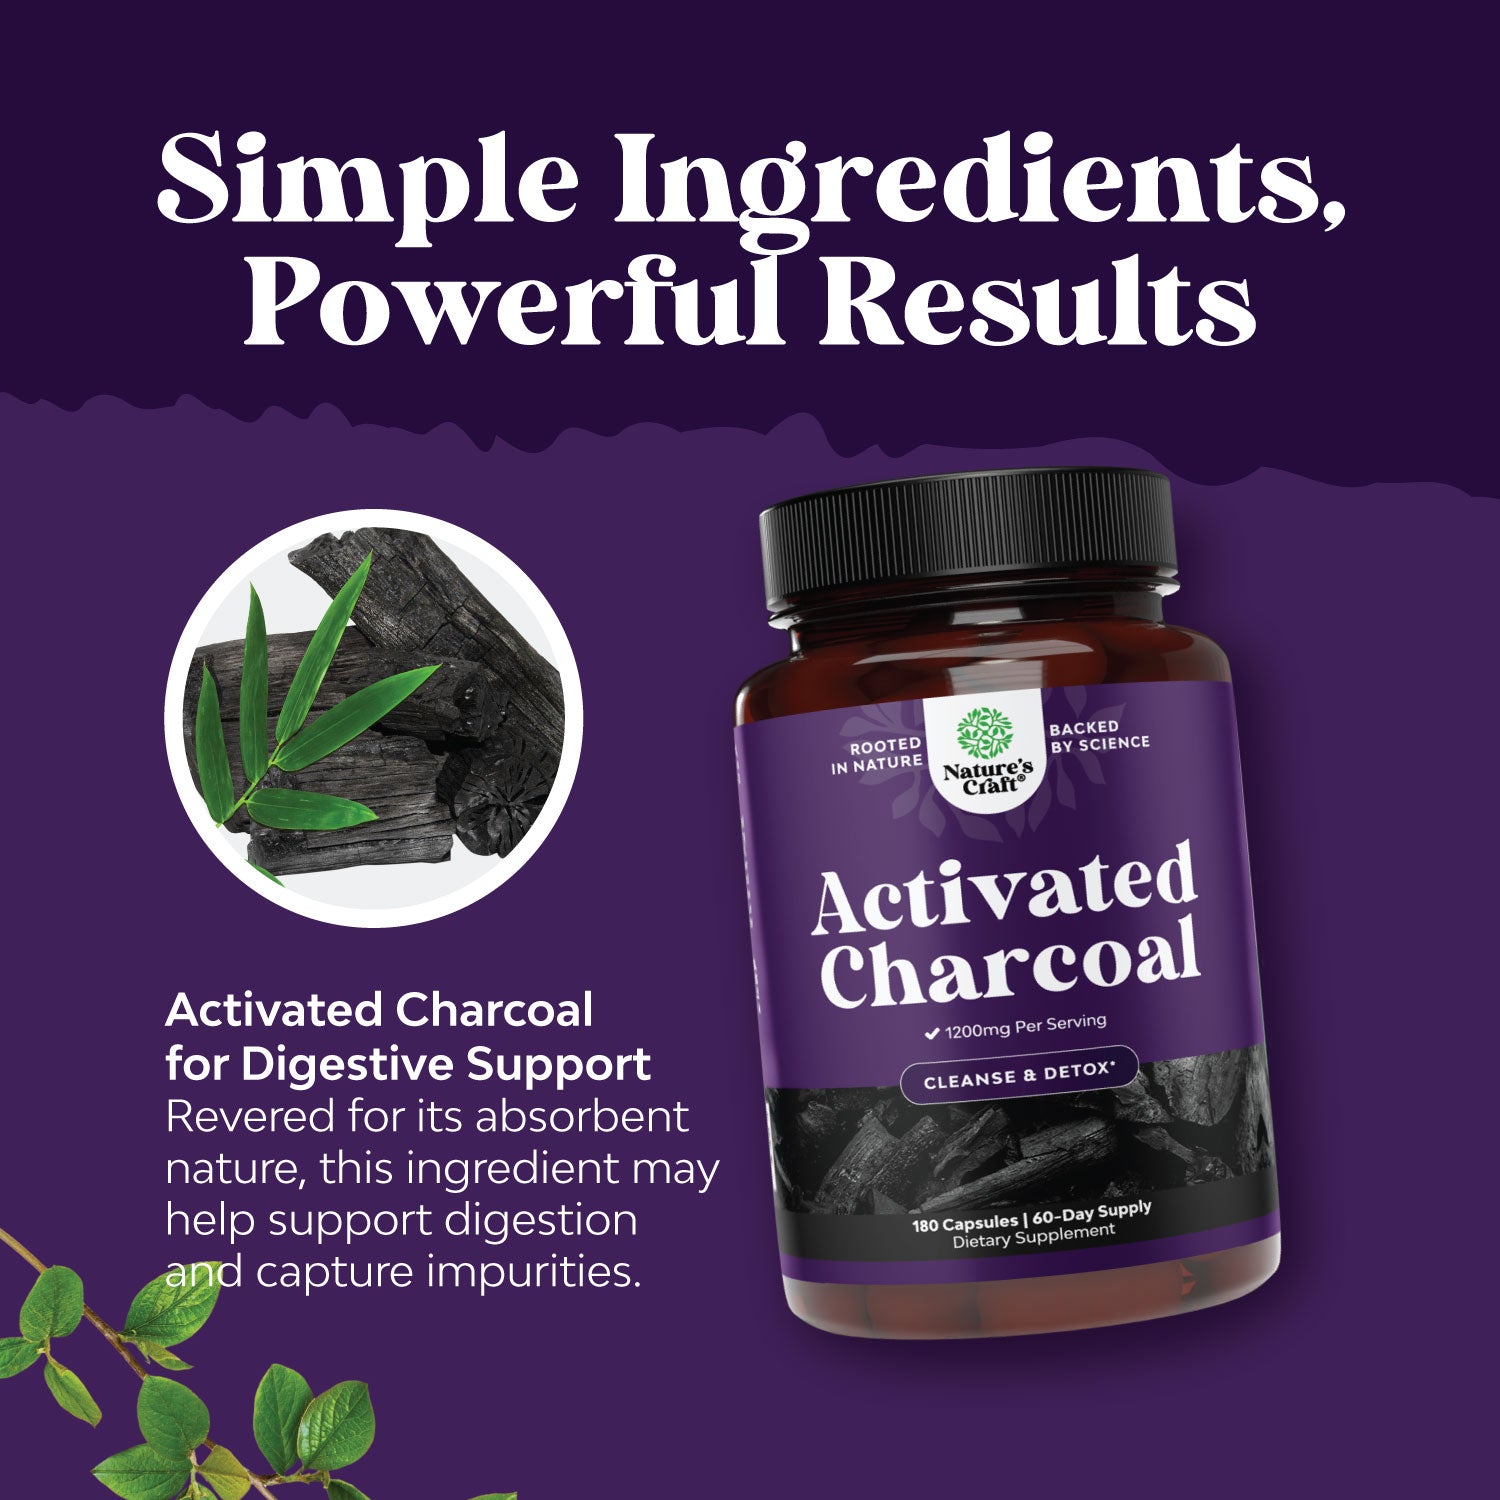 Activated Charcoal 1200mg per serving - 180 Capsules